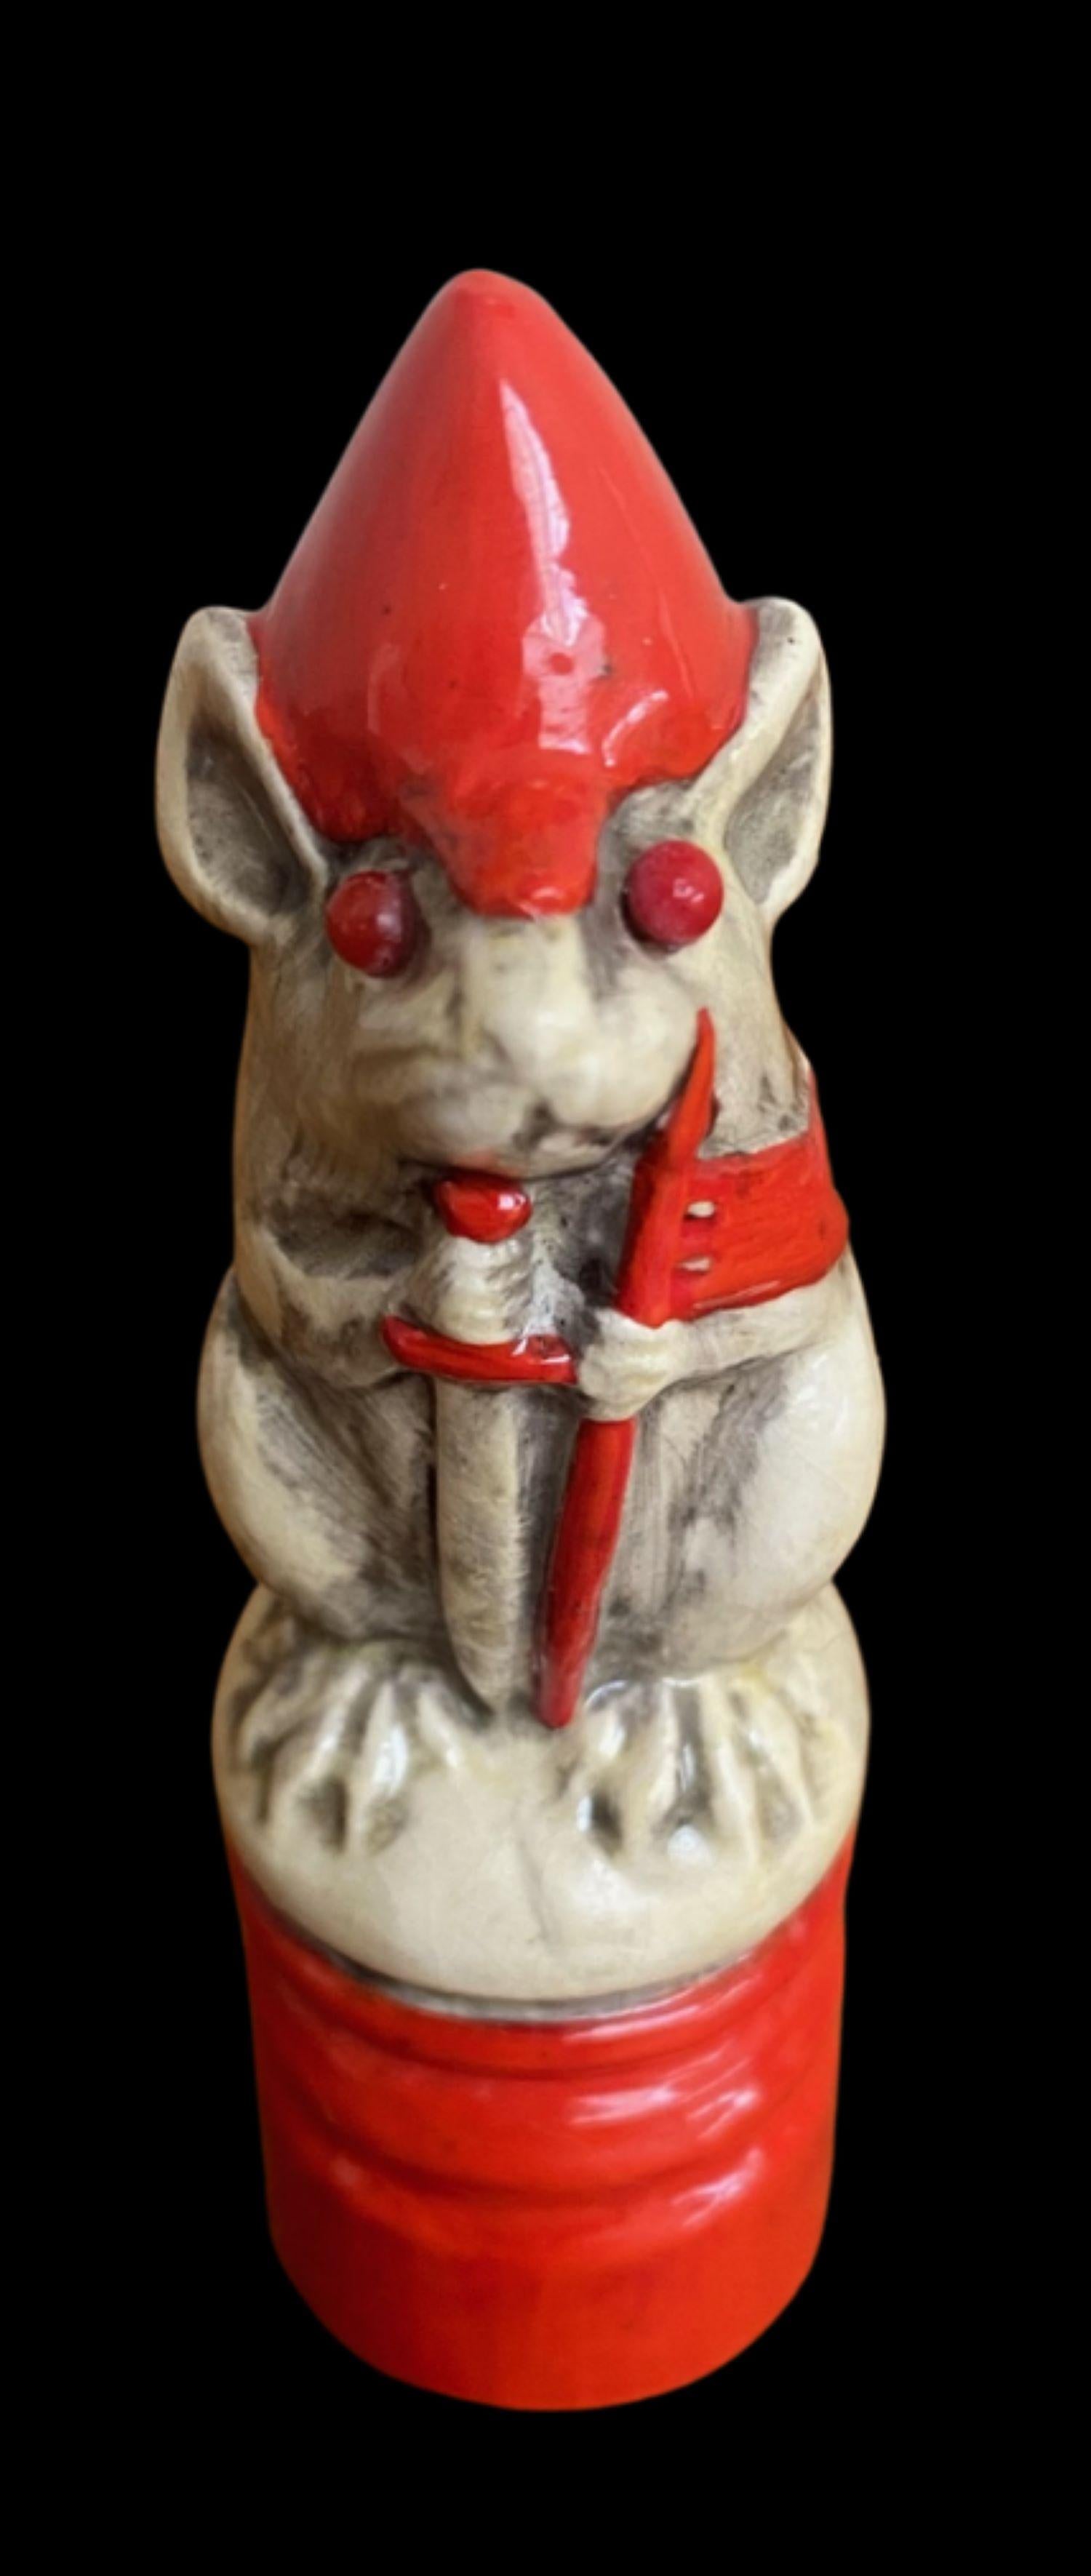 5135

George Tinworth for Doulton. A red knight chess piece modelled as a mouse

Circa 1900

Dimensions
8cm high

Complimentary Insured Postage
14 Day Money Back Guarantee
BADA Member – Buy the Best from the Best.